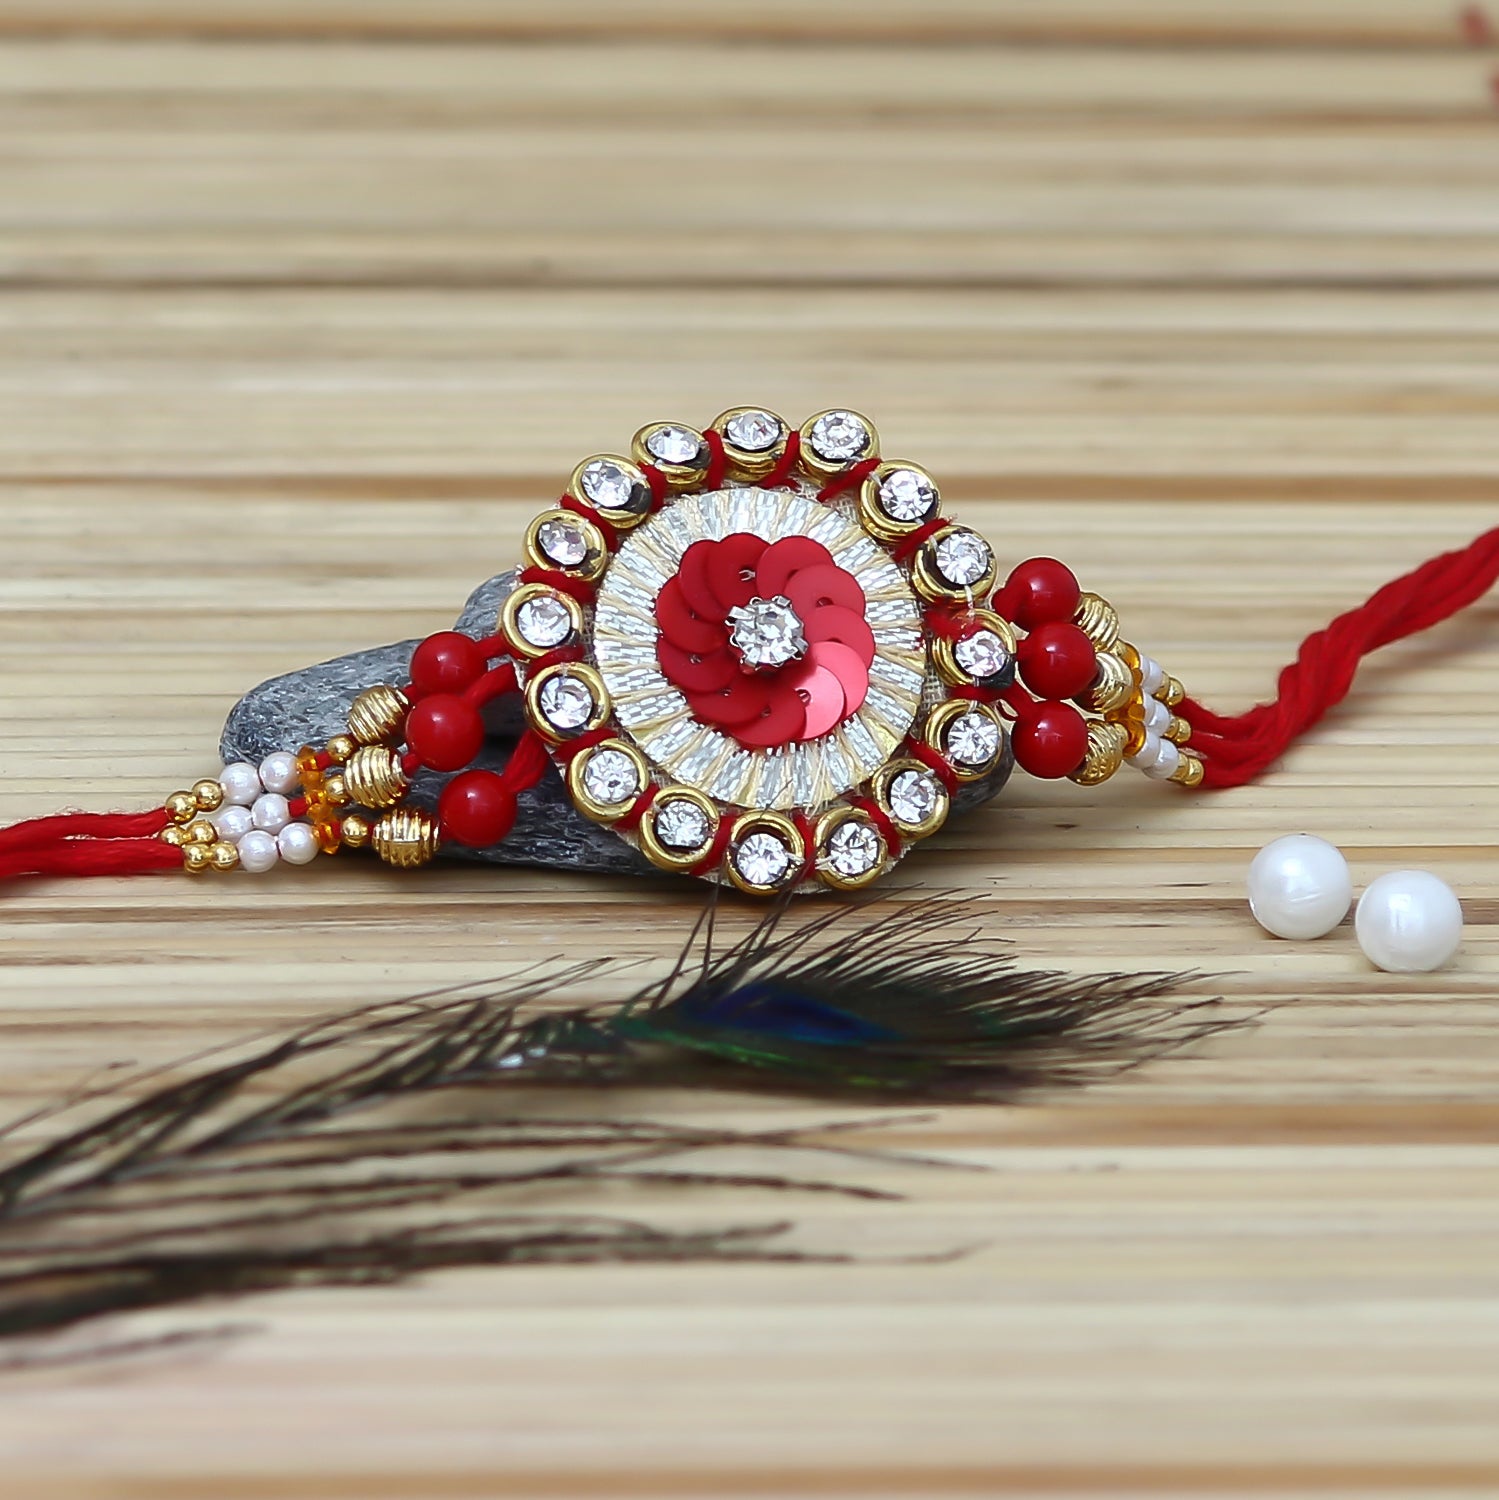 Designer Rakhi with Soan Papdi (500 Gm) and Roli Chawal Pack, Best Wishes Greeting Card 1